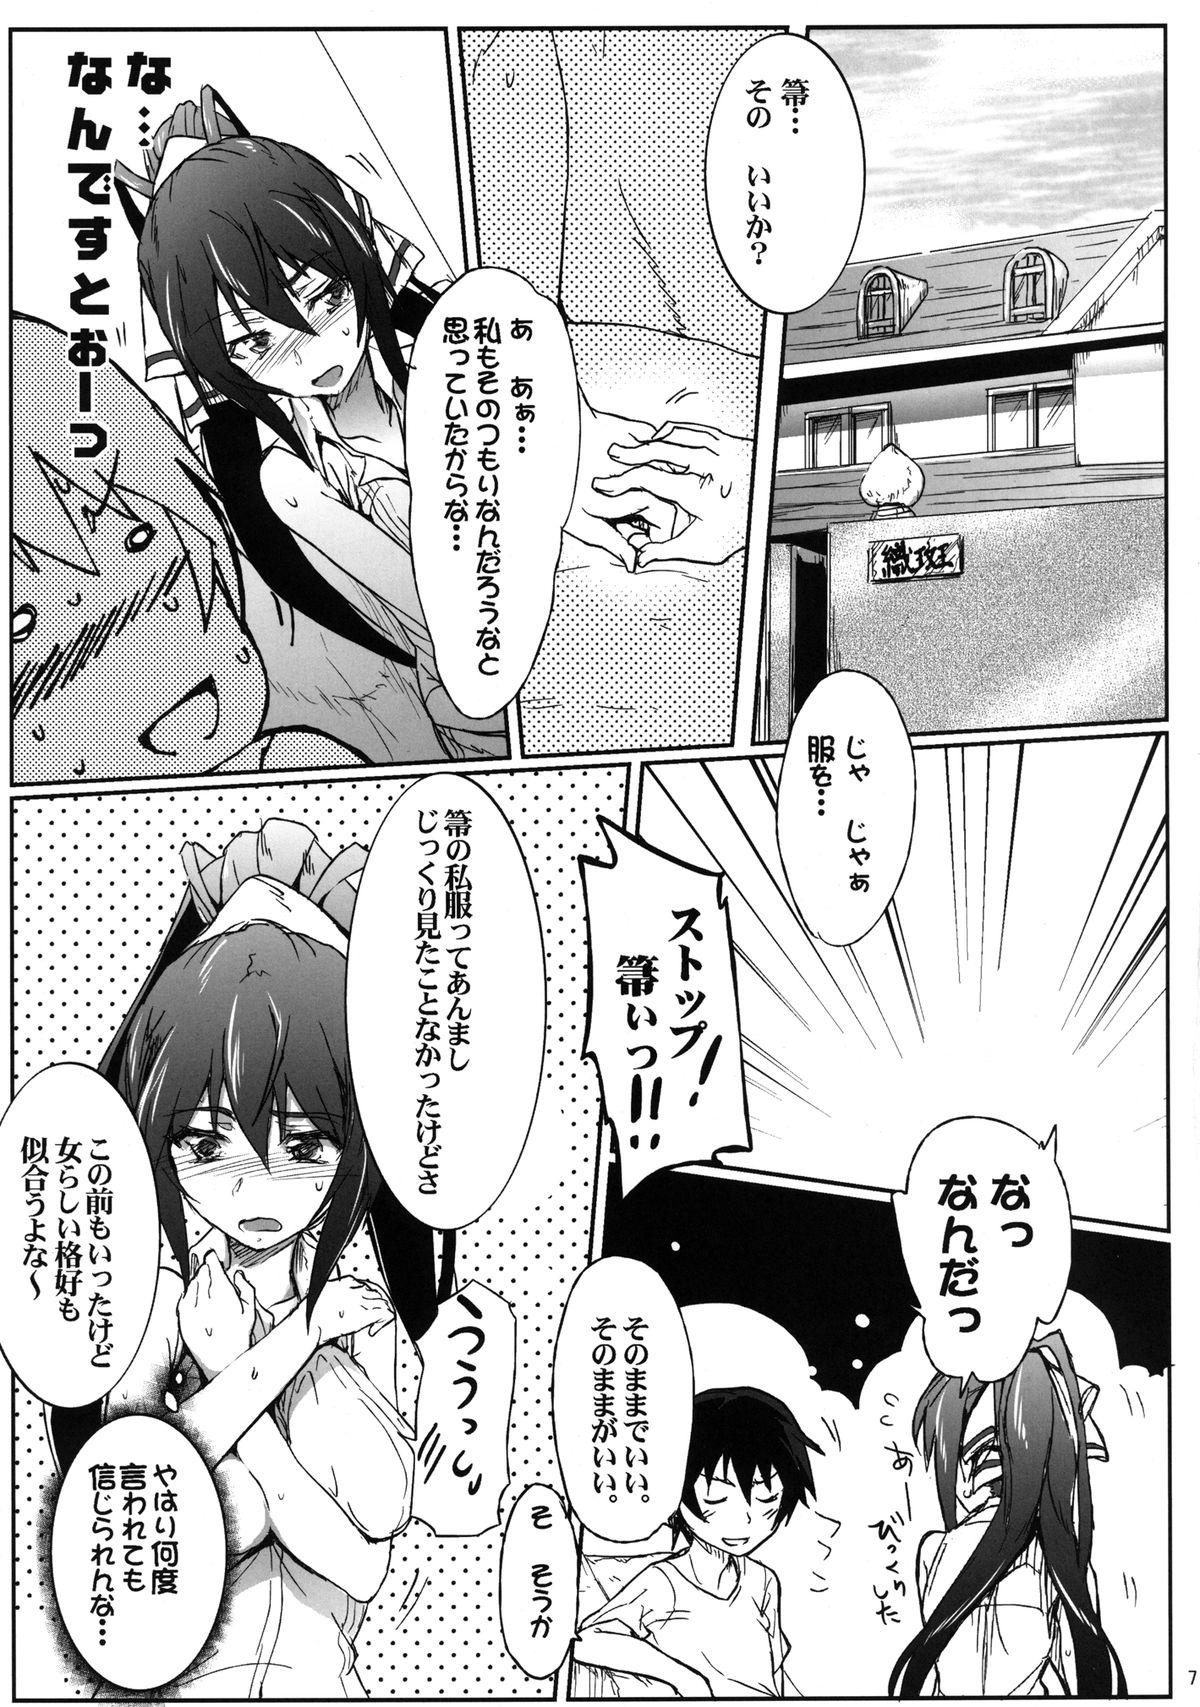 College IS Girls 3 - Infinite stratos Cbt - Page 7